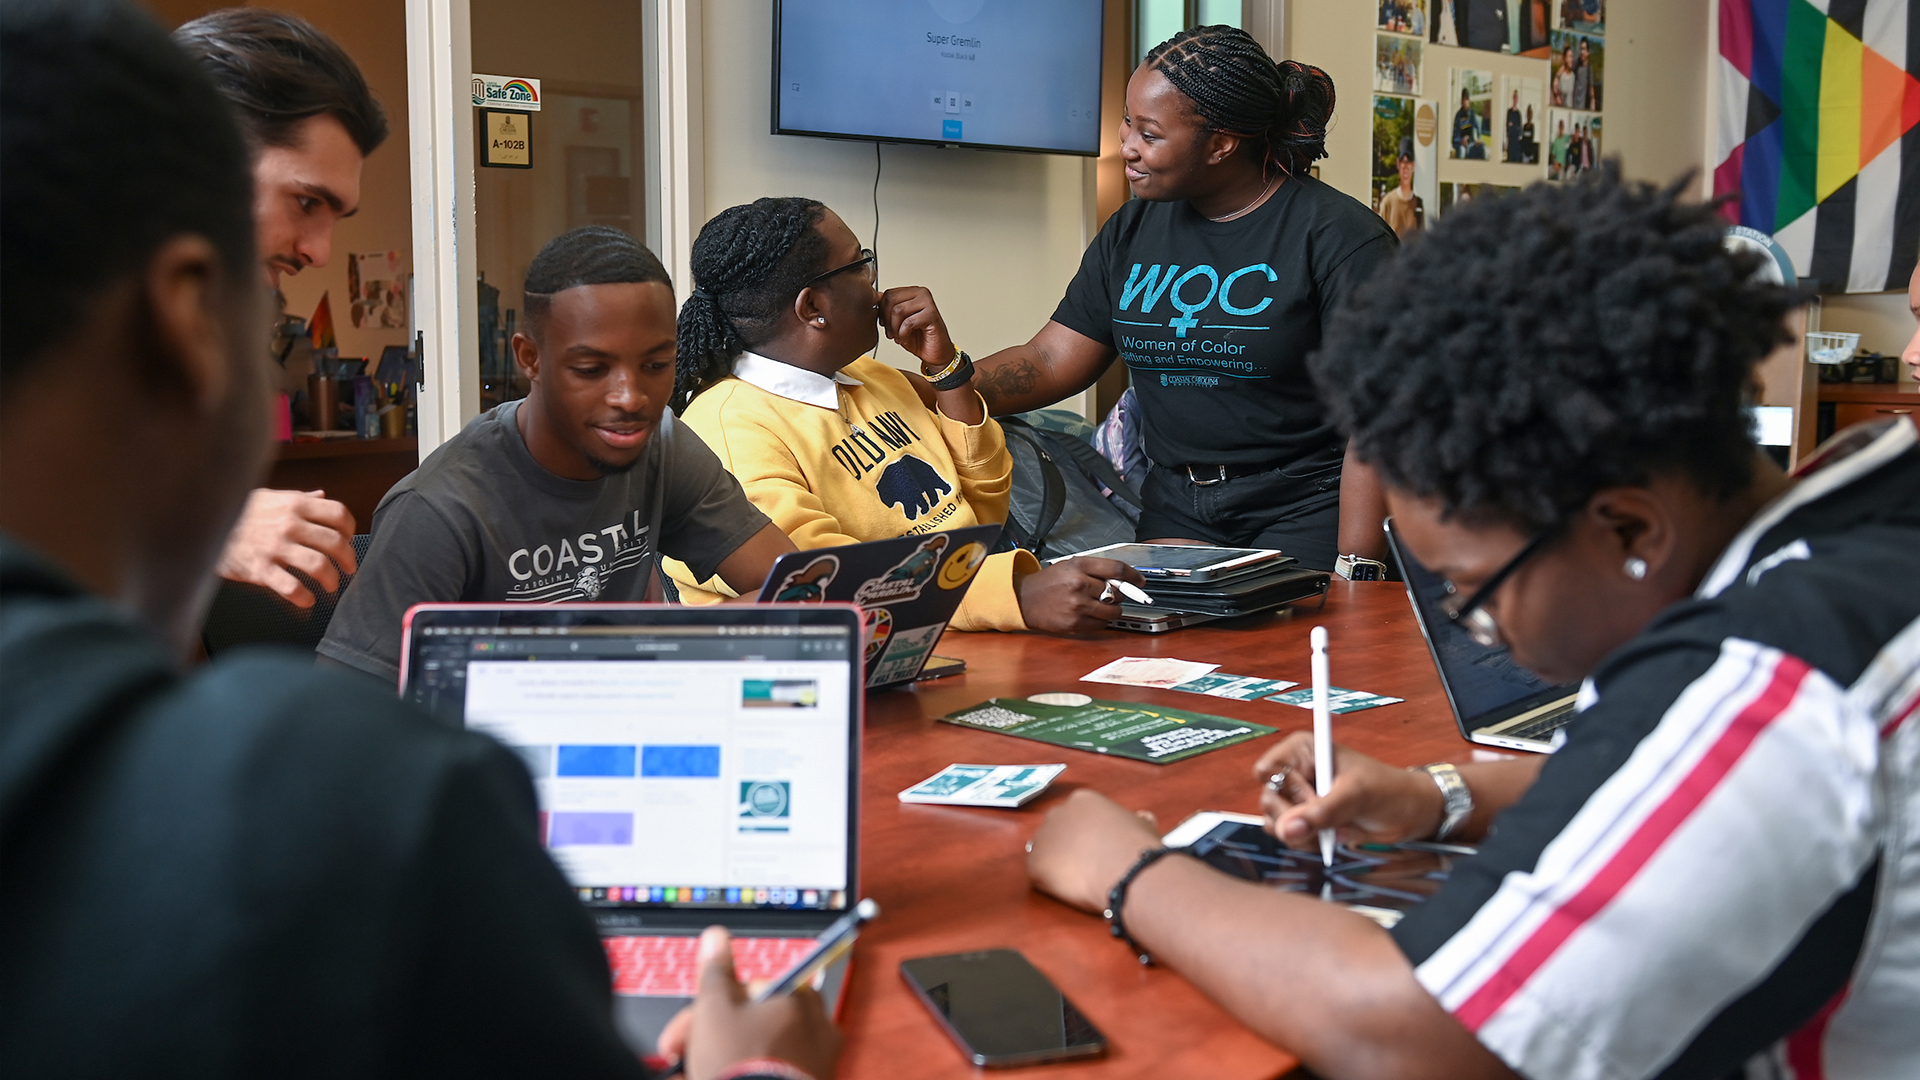 Students gather in discussion at a desk in the Intercultural and Inclusion Student Services offices